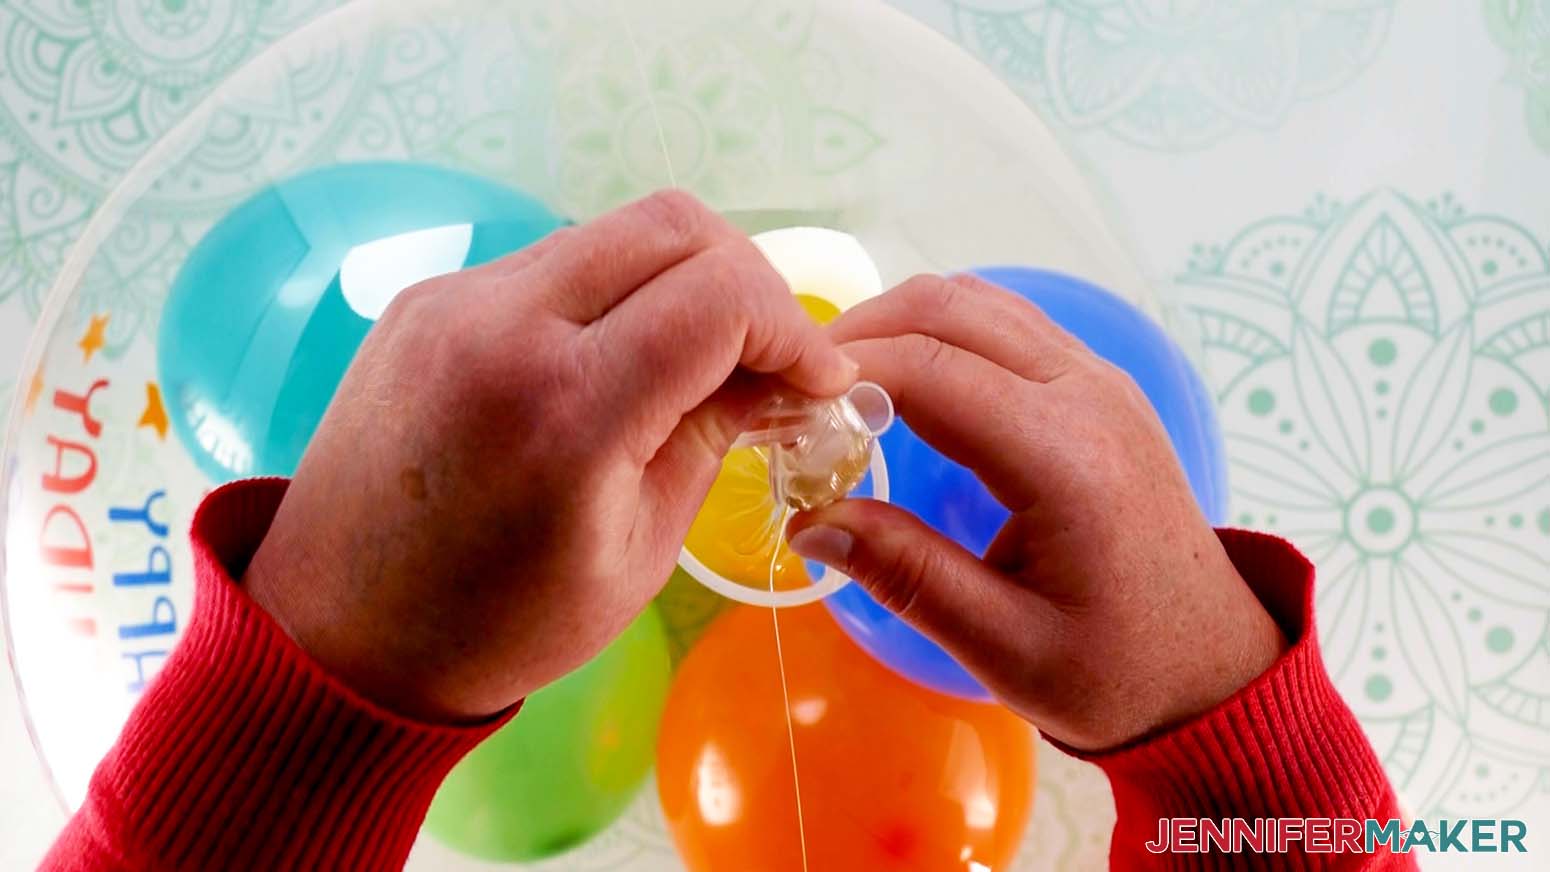 A closeup photo showing a balloon cup being attached to the tied end of an inflated Bobo balloon. Colored latex balloons can be seen inside the balloon.